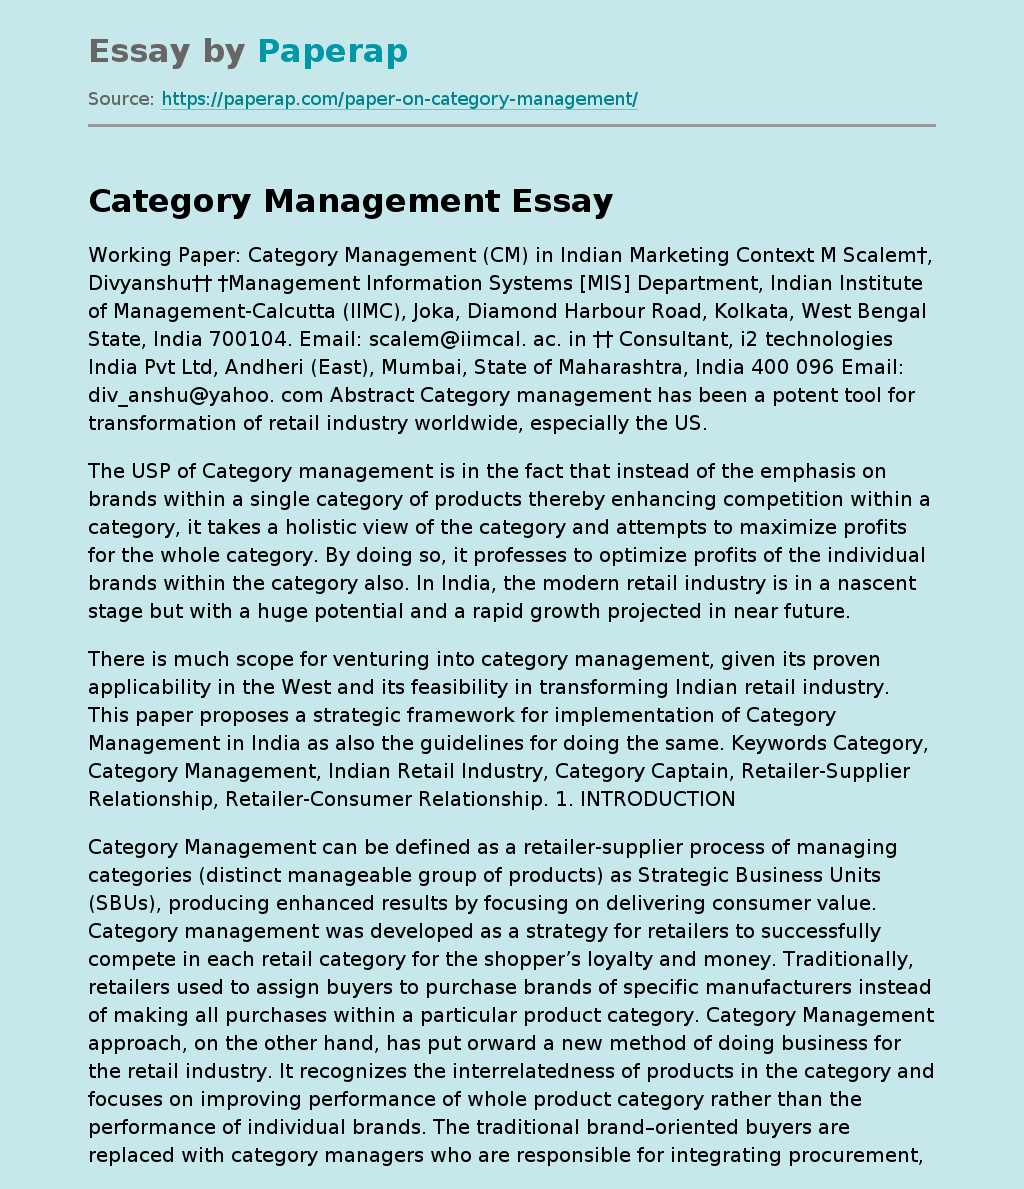 Working Paper: Category Management (CM) in Indian Marketing Context